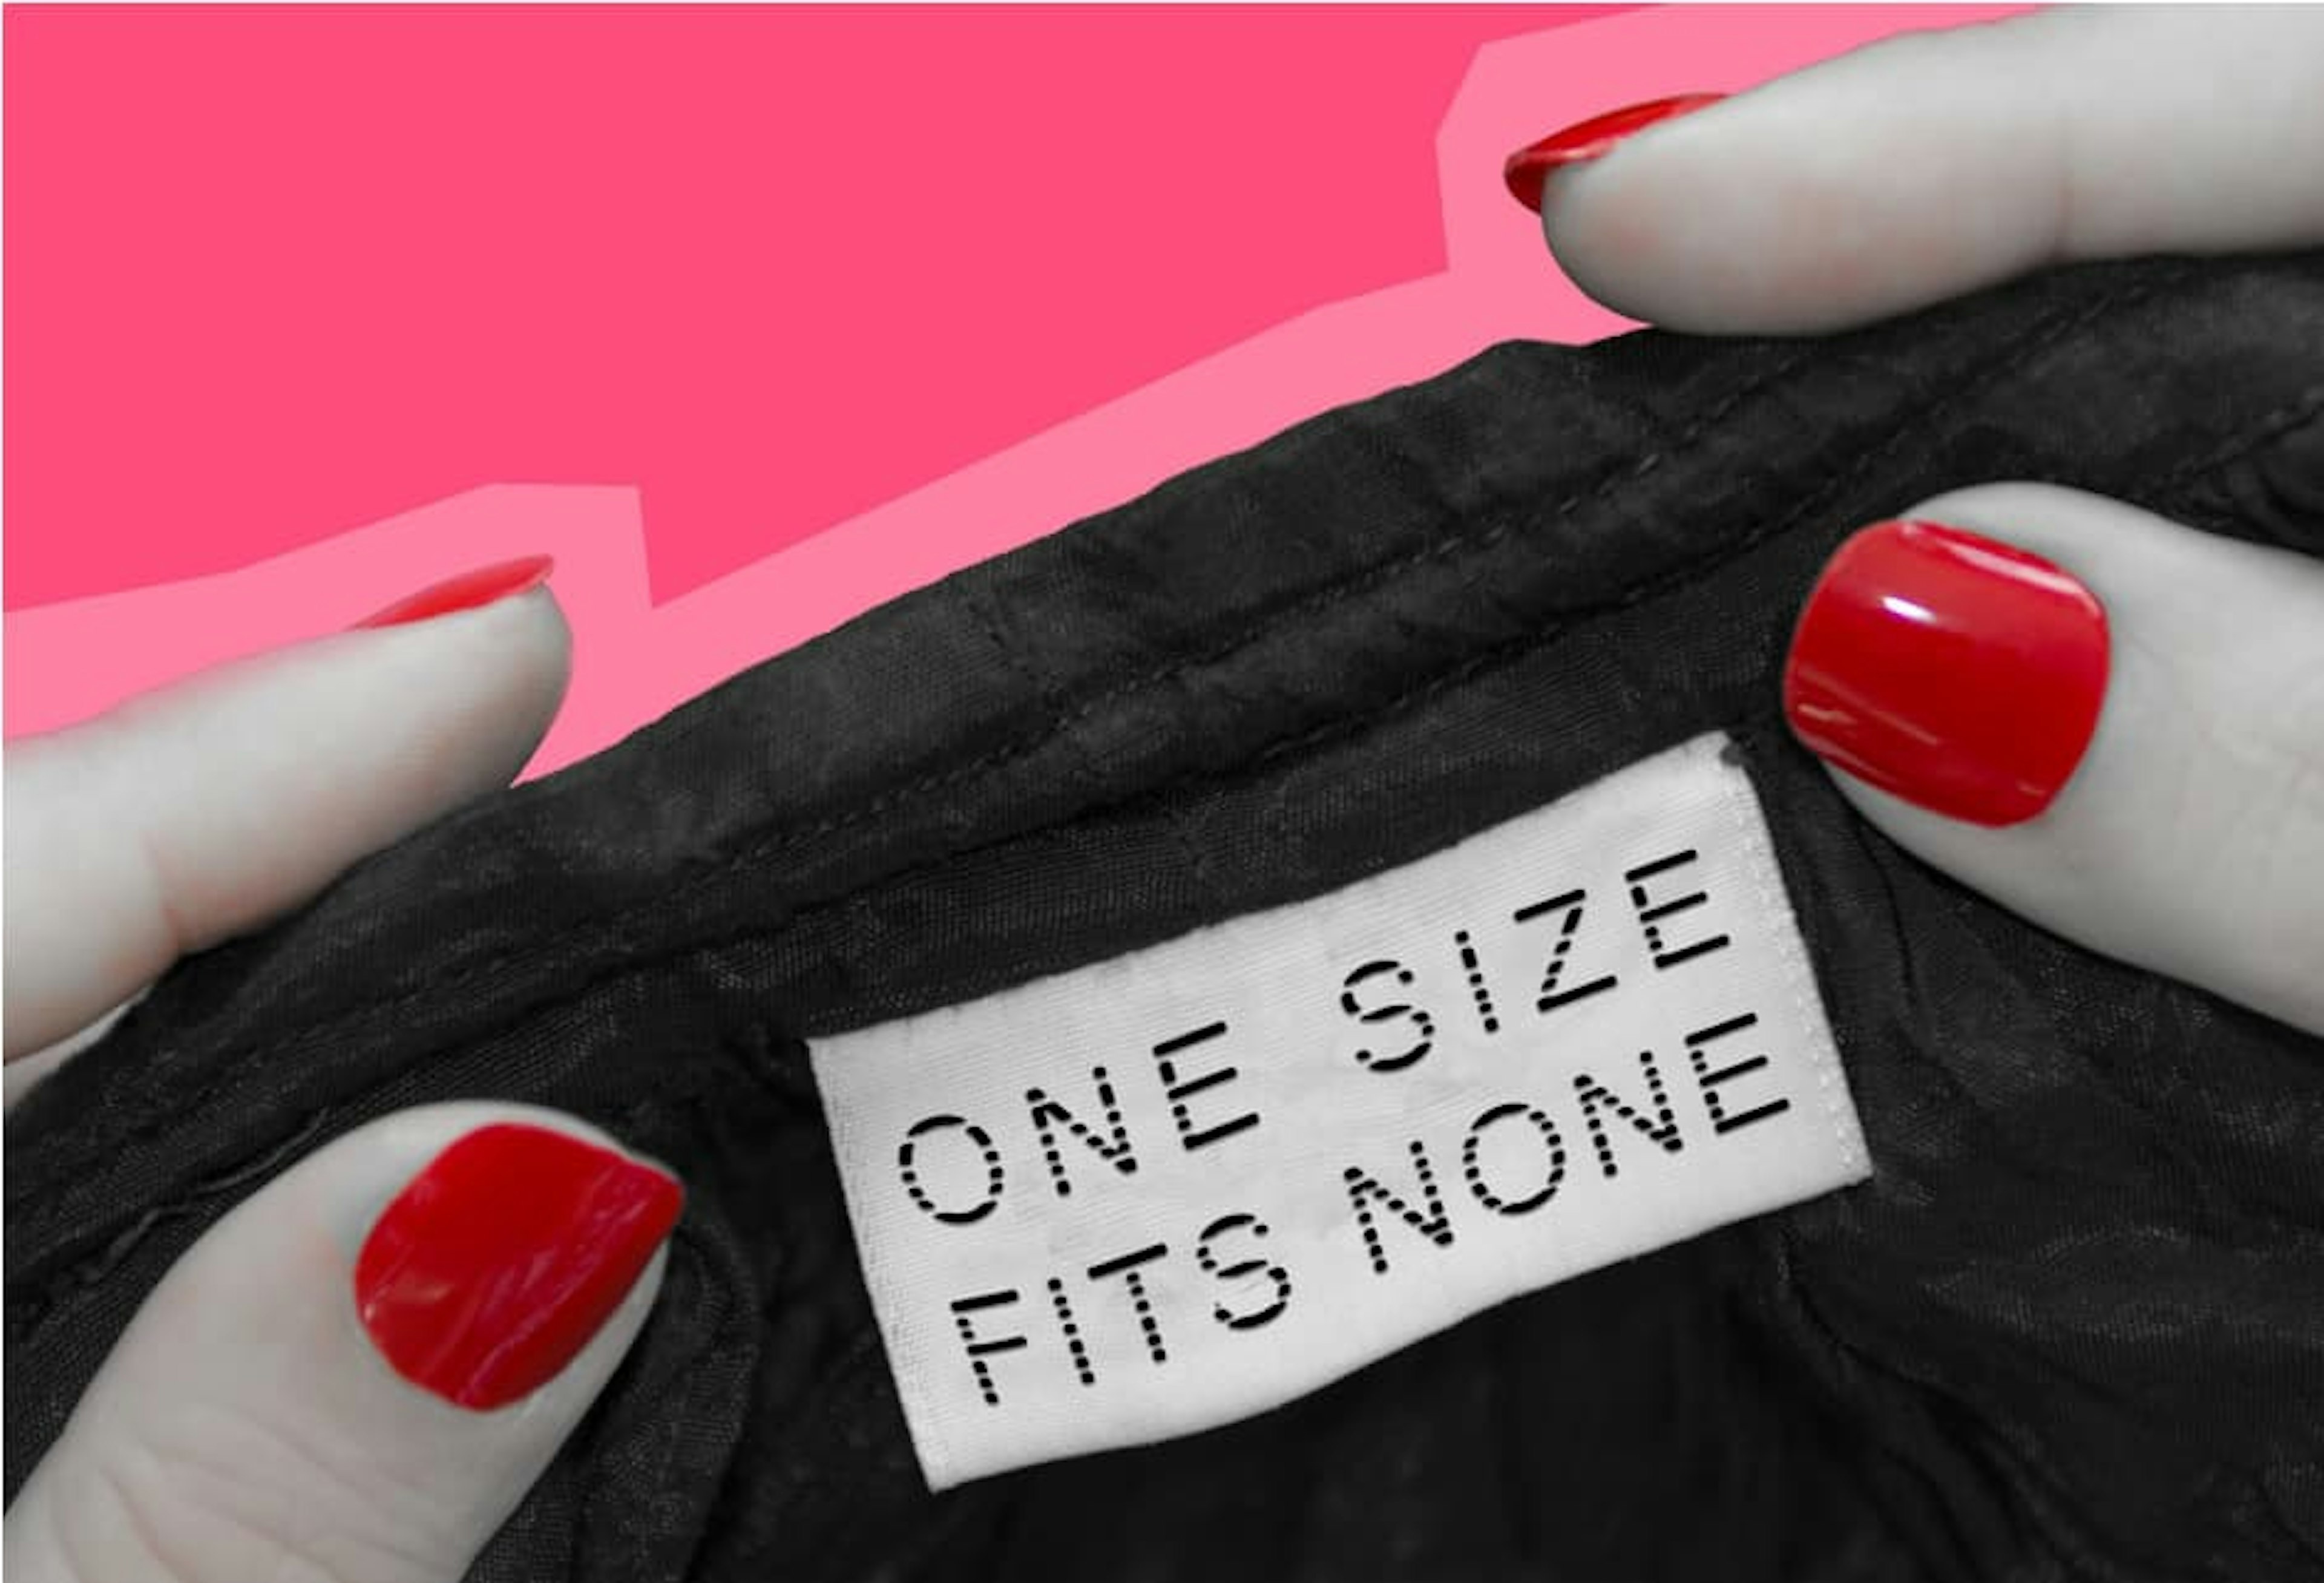 A clothing tag that says "One Size Fits None."